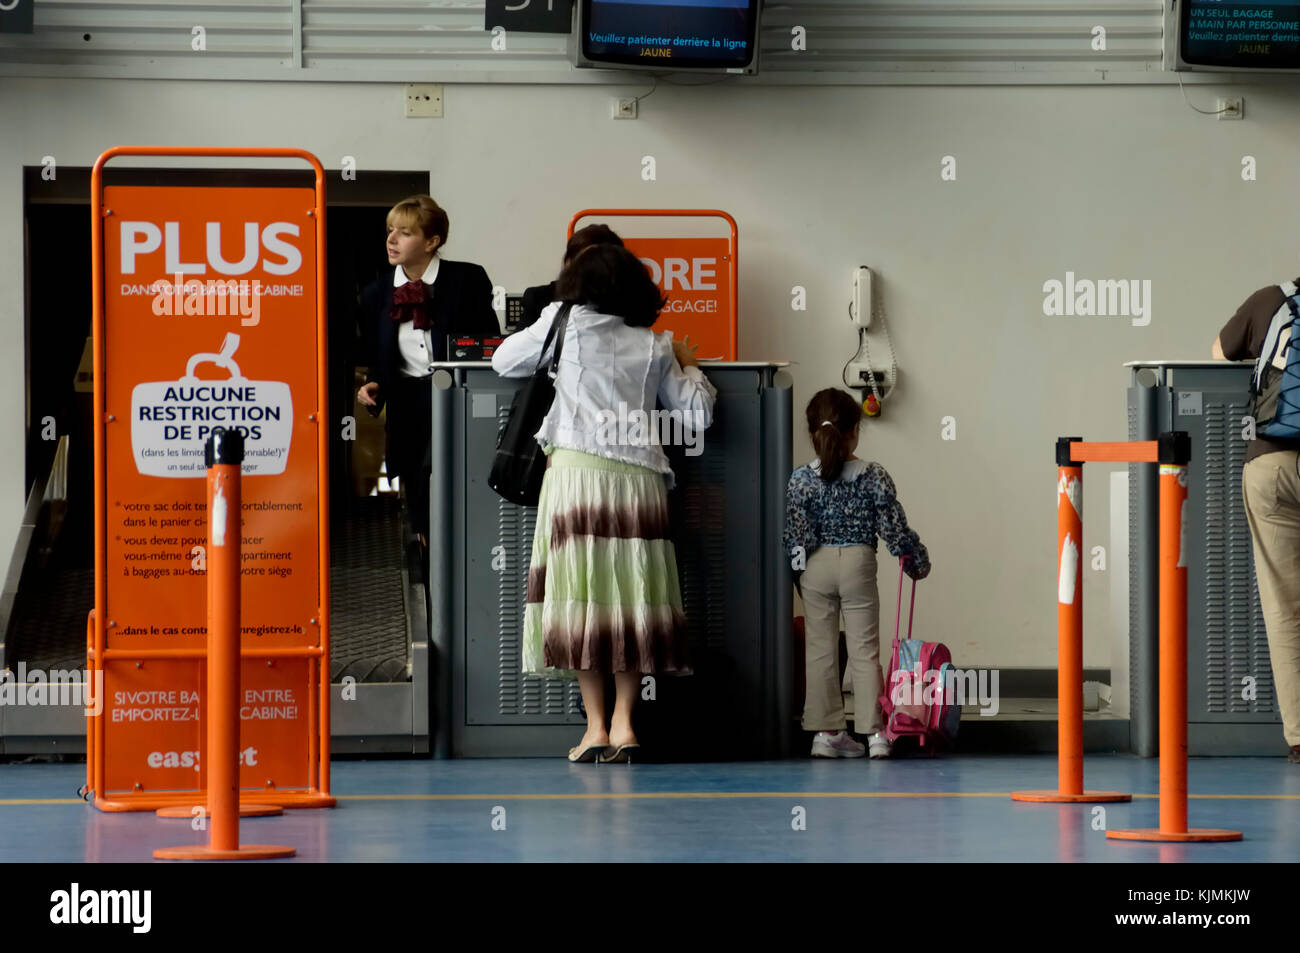 leisure passengers, a mother and young girl at the Terminal3 easyJet check-in desks with 'no carry-on baggage weight restrictions' signs in French lan Stock Photo